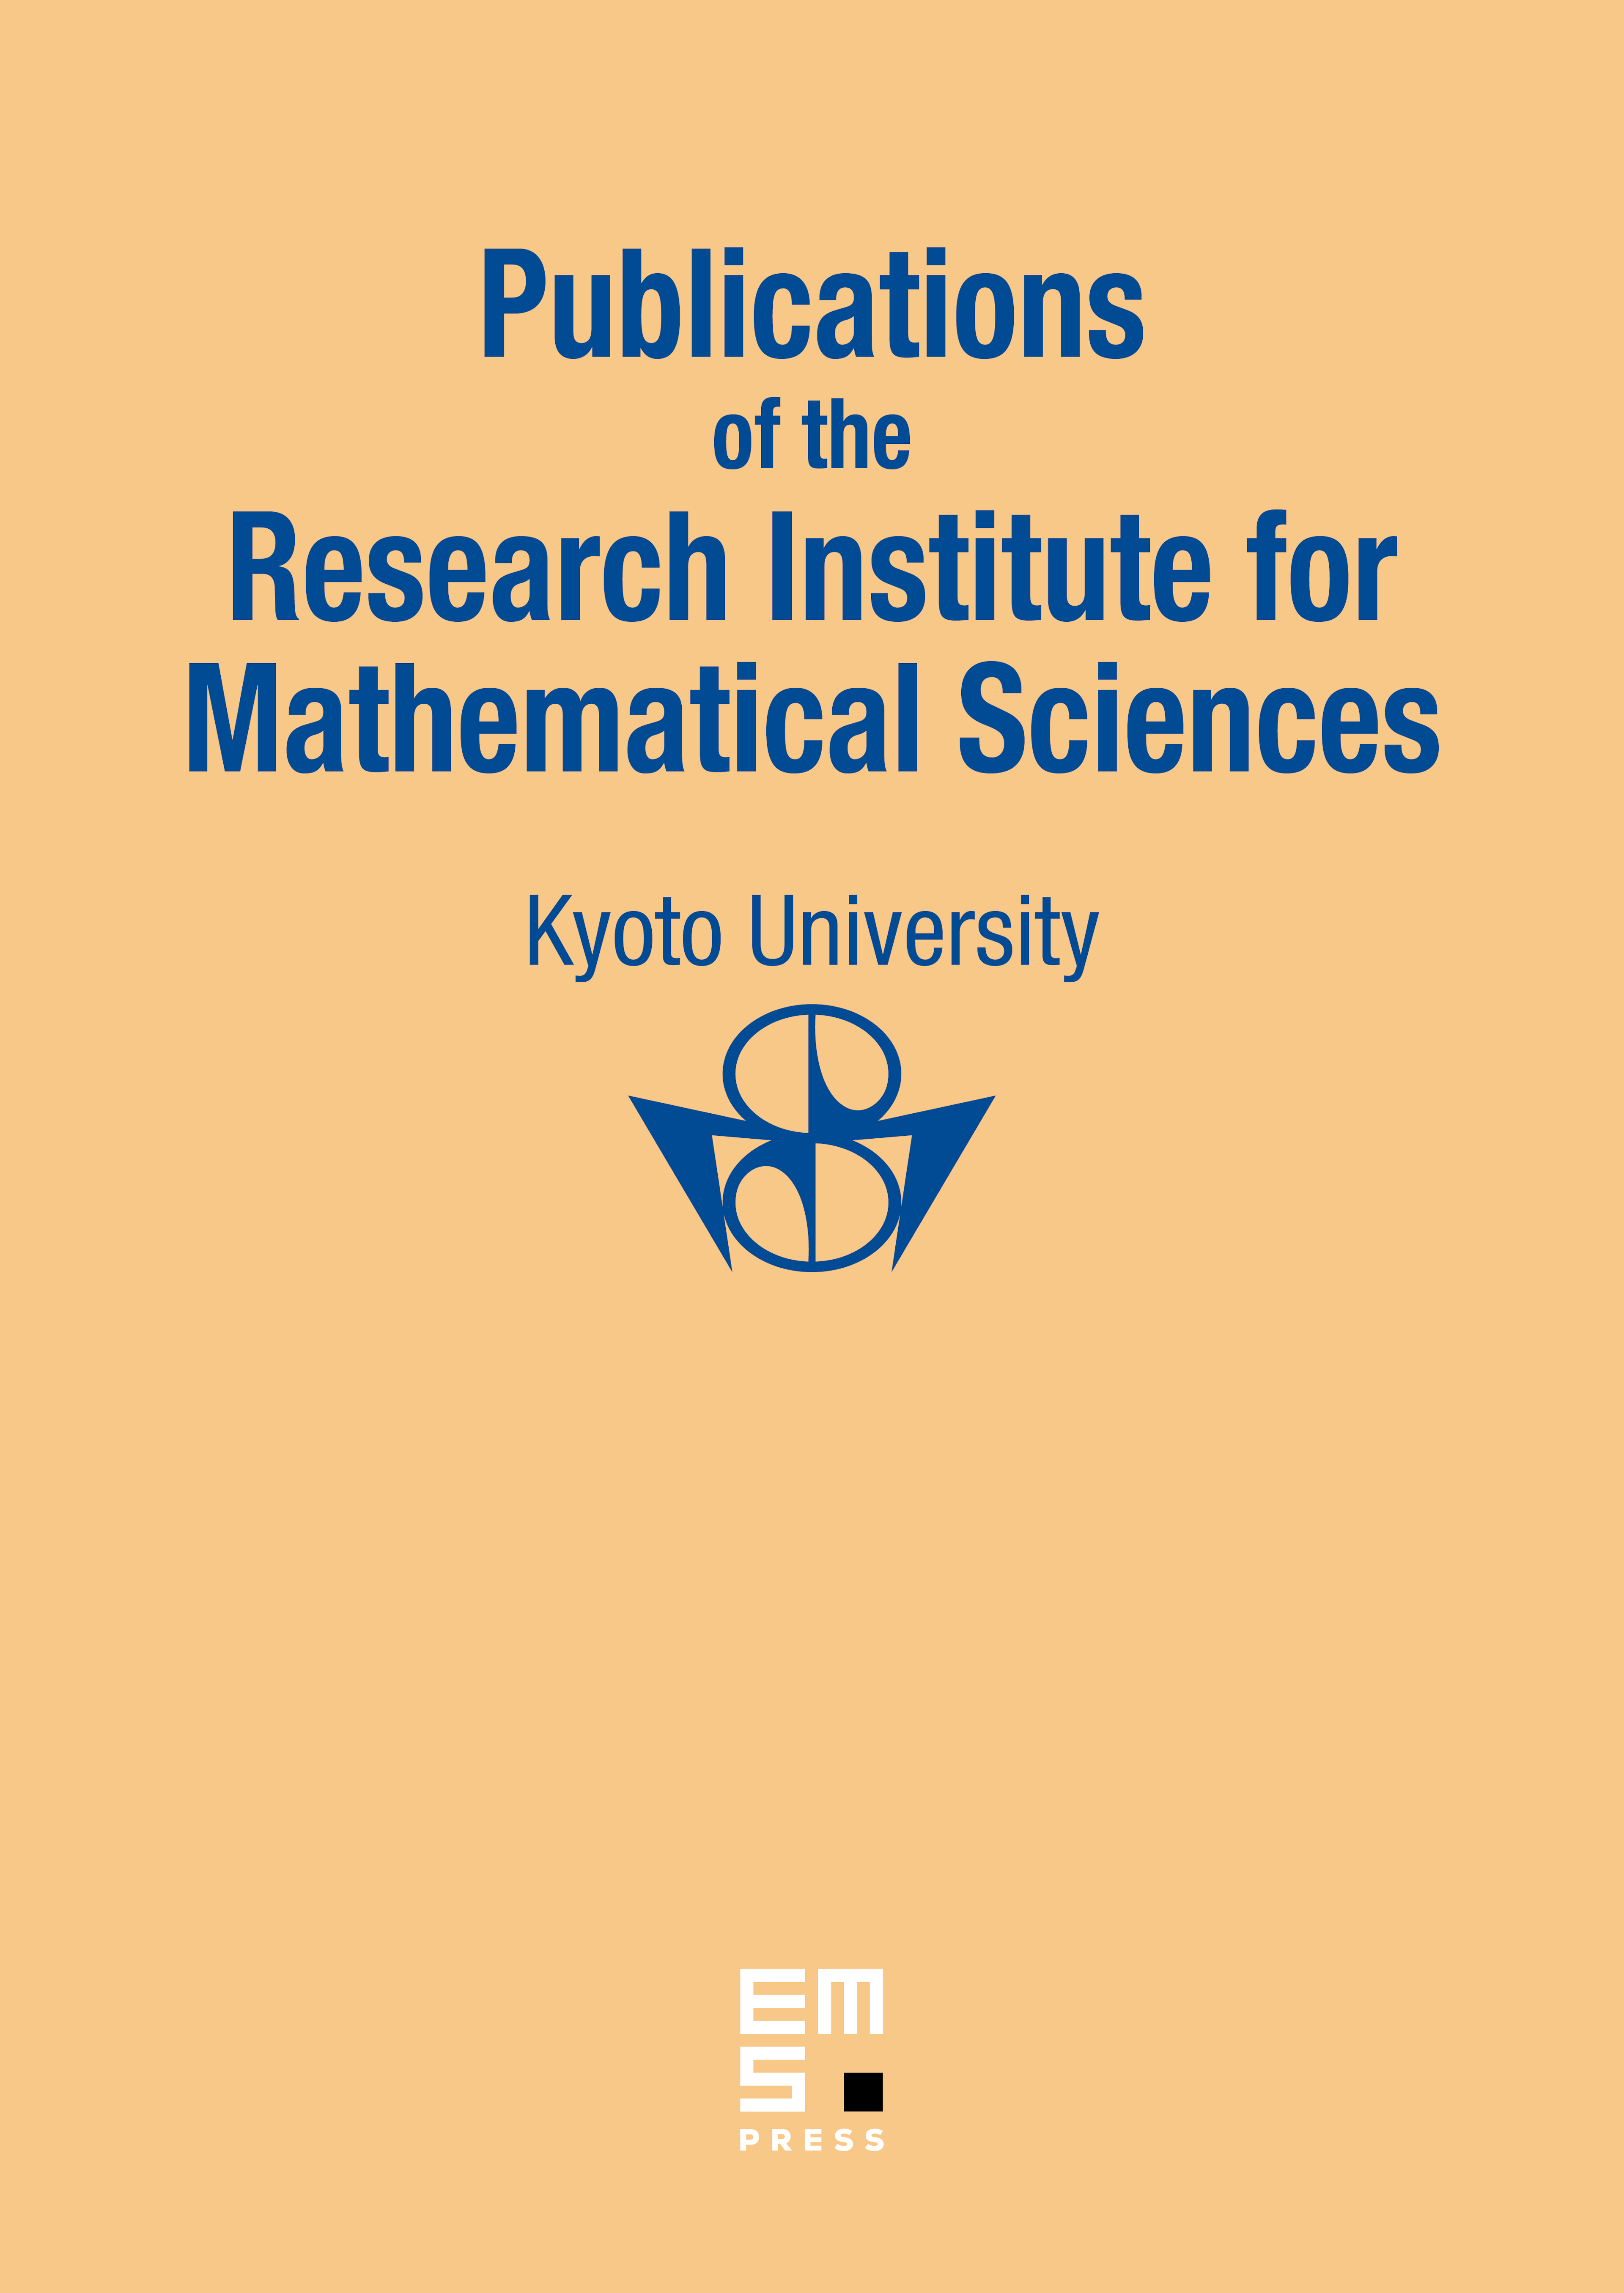 Publ. Res. Inst. Math. Sci. cover